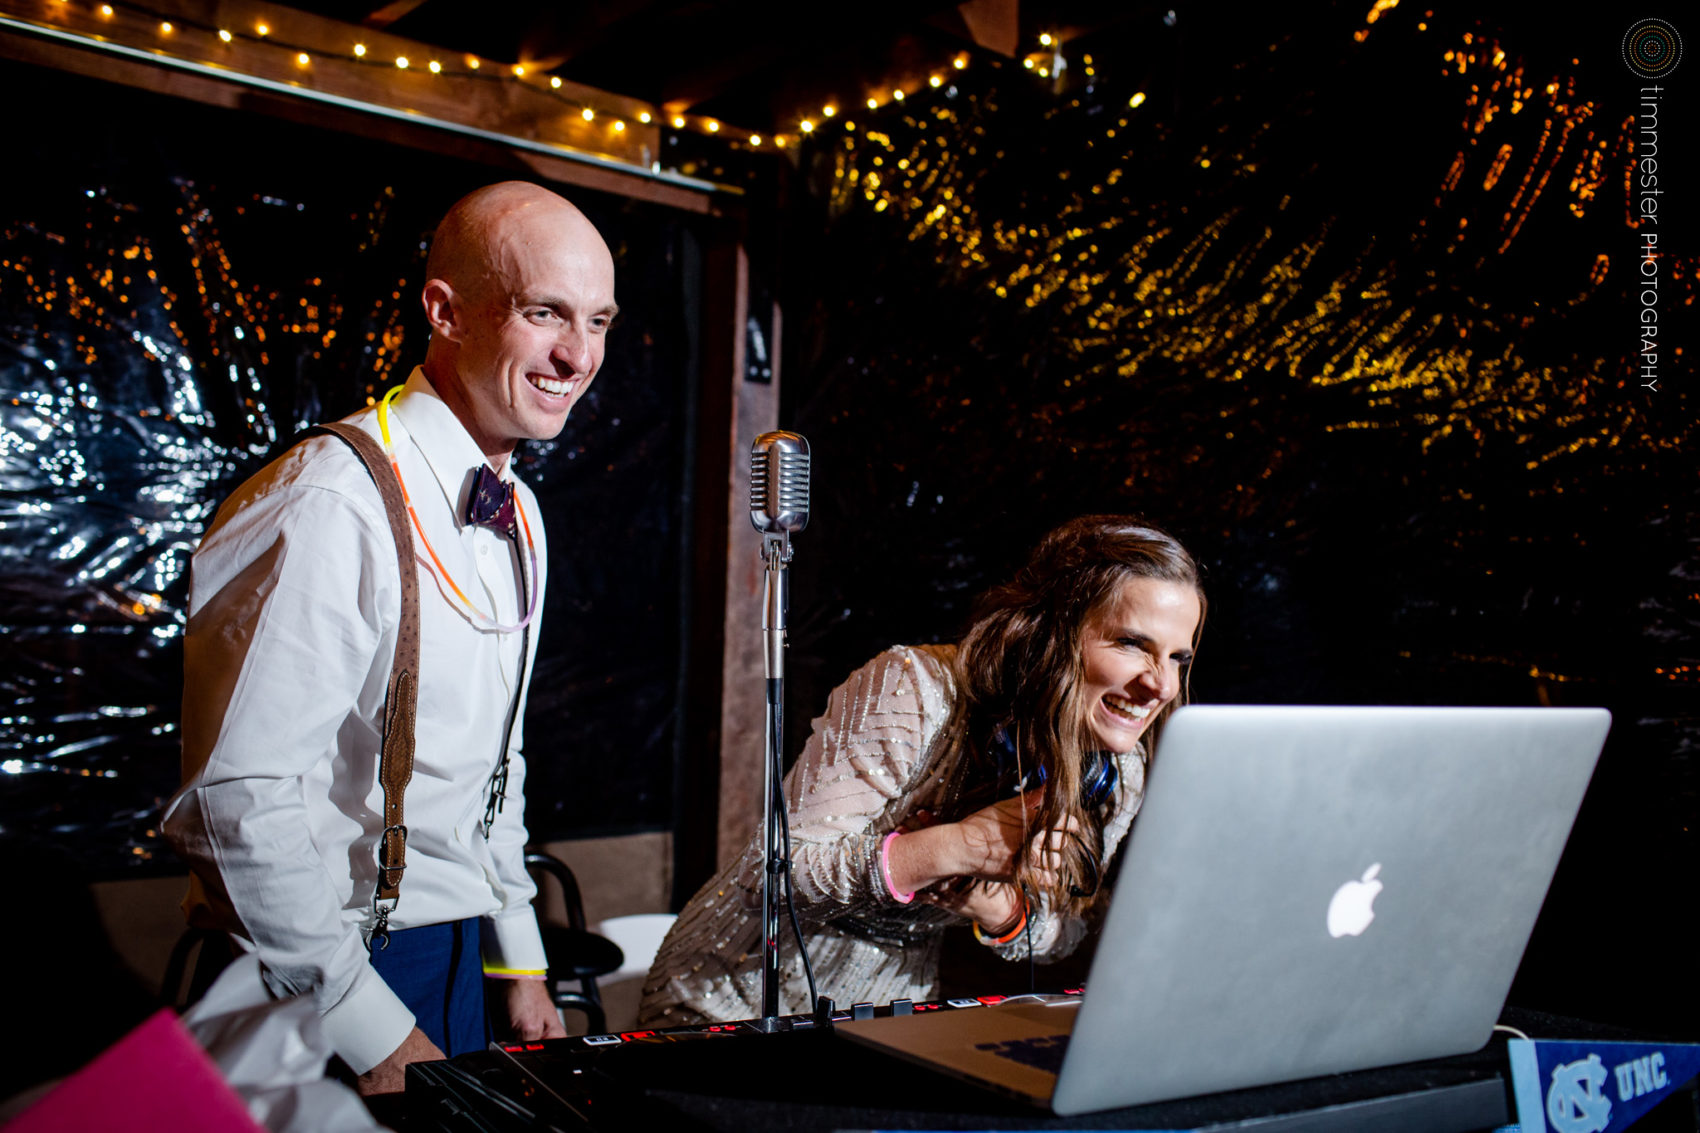 The bride and groom DJ at their wedding reception at Chapel Hill Carriage House